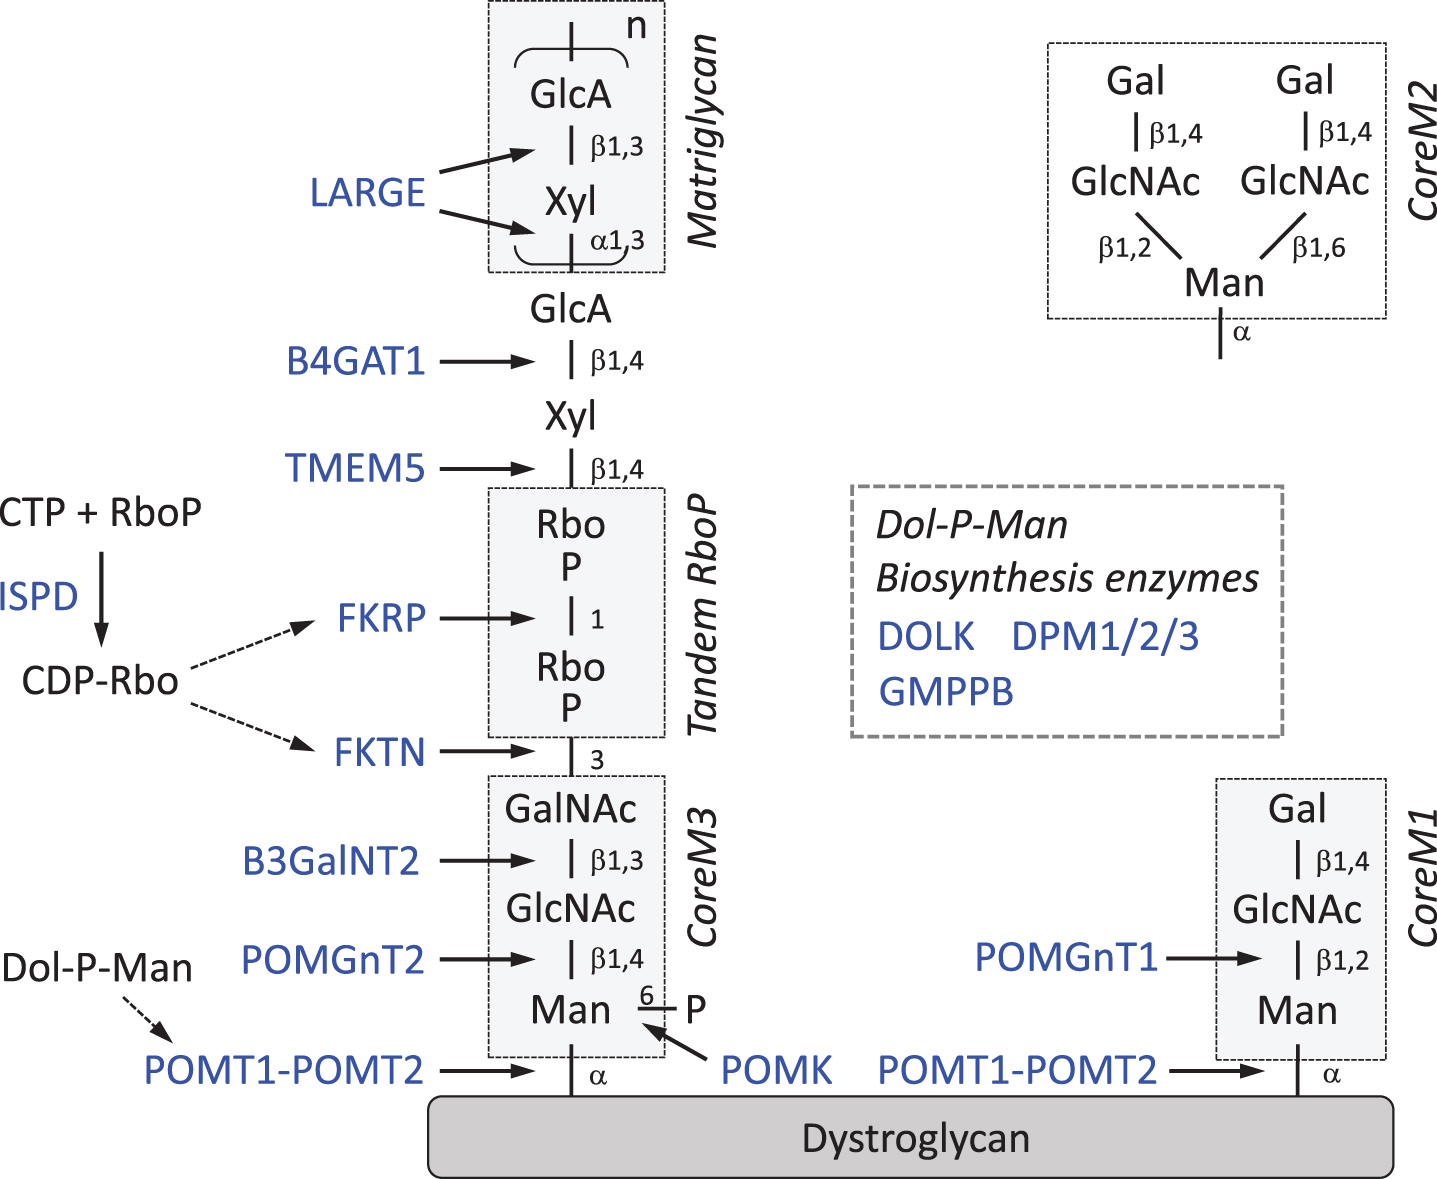 Sugar chain structure of α-DG and functions of DGpathy genes. DGpathy gene products are written in blue and their functions are indicated by arrows. Note that nomenclature for the “Core” structure denoting O-Man extended only by GlcNAc residues has been also proposed [65]. RboP, ribitol 5-phosphate; GlcA, glucuronic acid; Xyl, xylose; GalNAc, N-acetylgalactosamine; GlcNAc, N-acetylglucosamine; Man, mannose; Dol-P-Man, dolicholphosphate mannose.